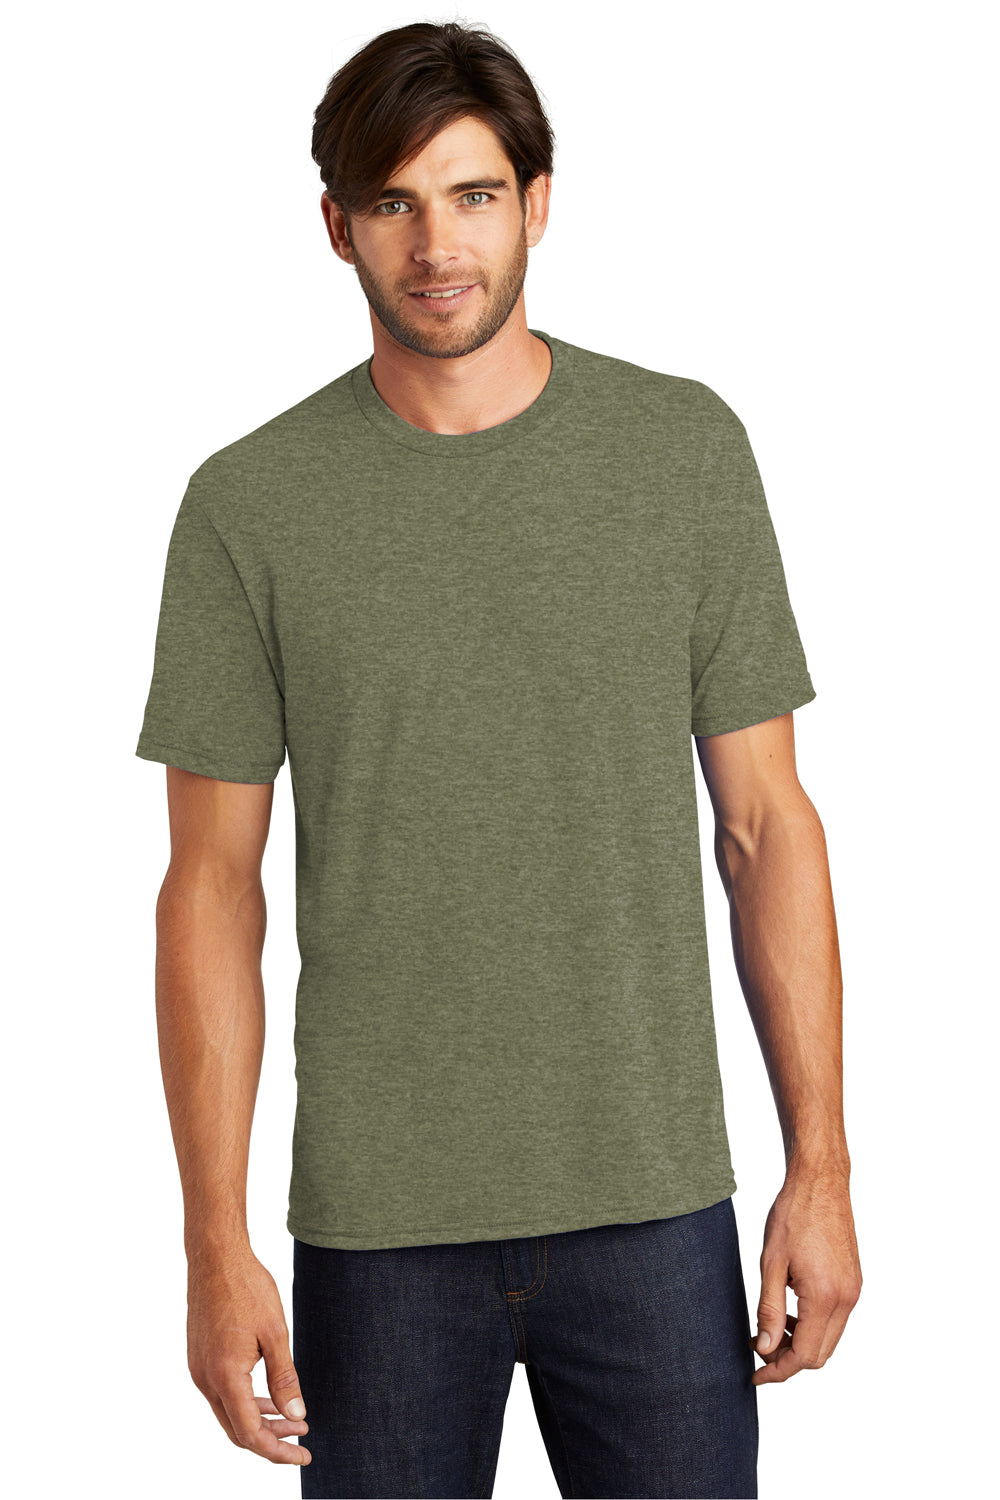 District DM130 Mens Perfect Tri Short Sleeve Crewneck T-Shirt Military Green Frost Front